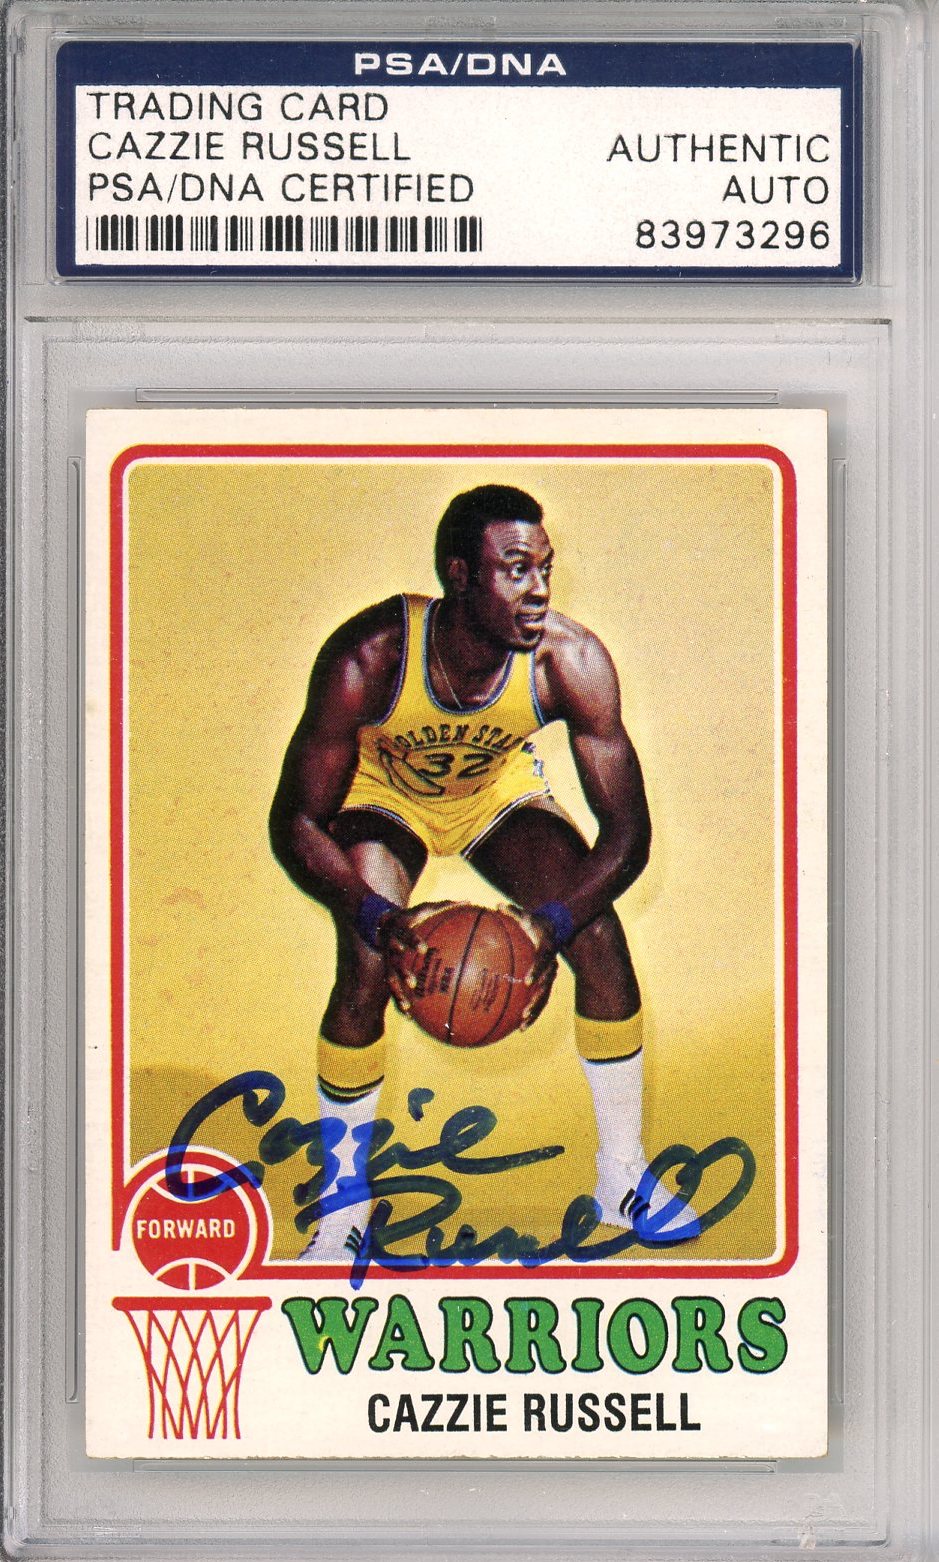 1973 TOPPS CAZZIE RUSSELL #41 PSA/DNA AUTO